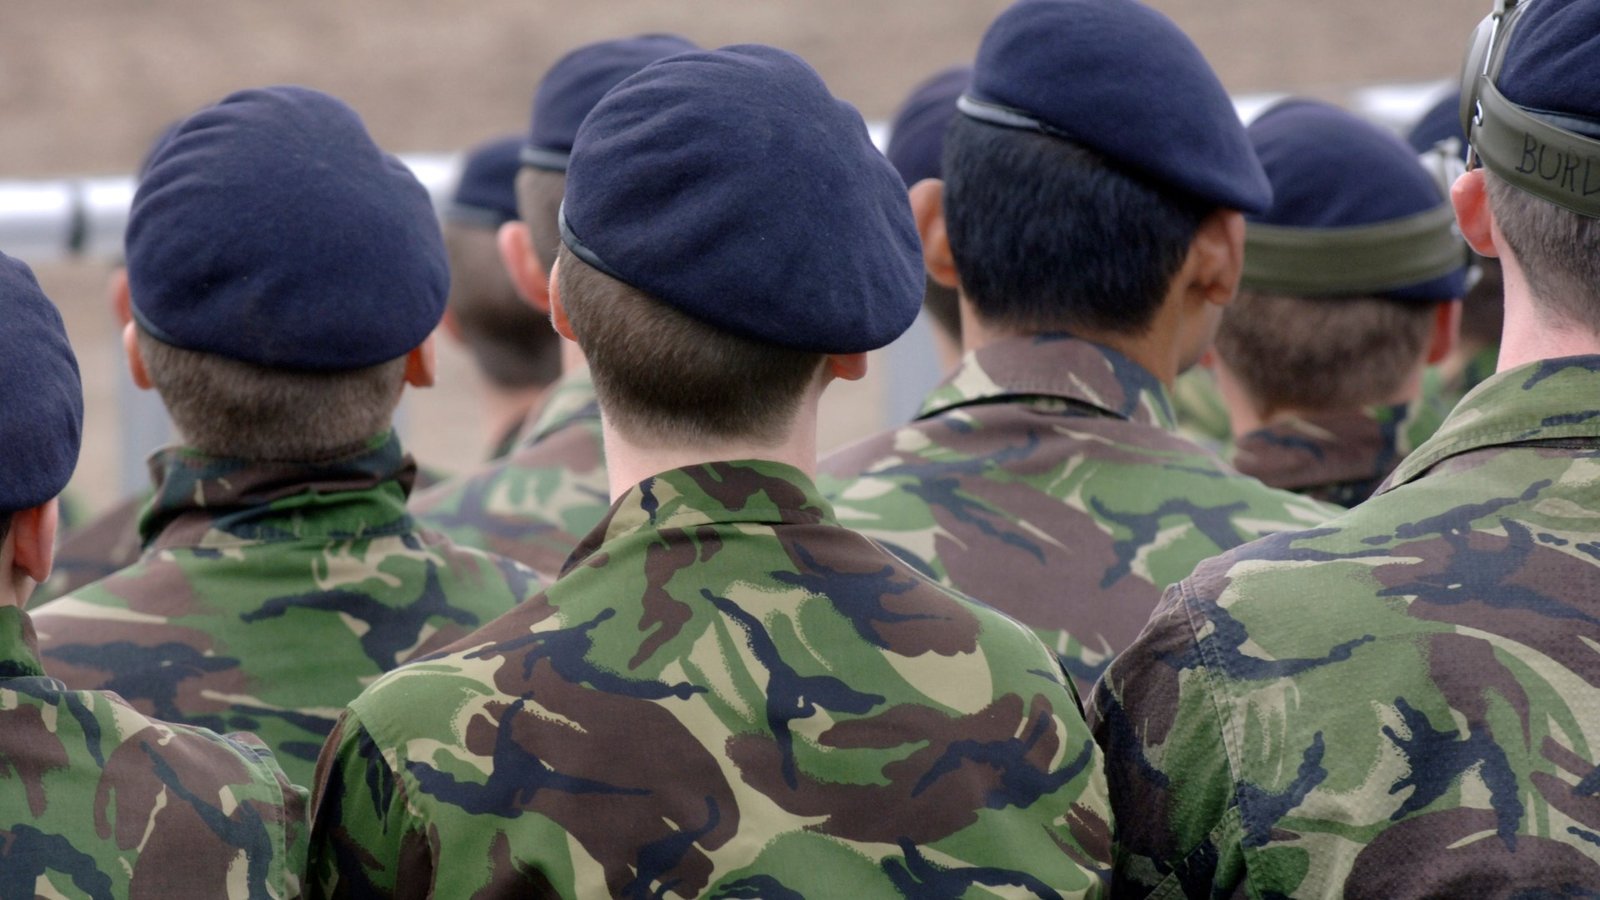 Fears rise as army’s size plummets to record low of 72,510 – below Tories’ target of 73,000 by 2025